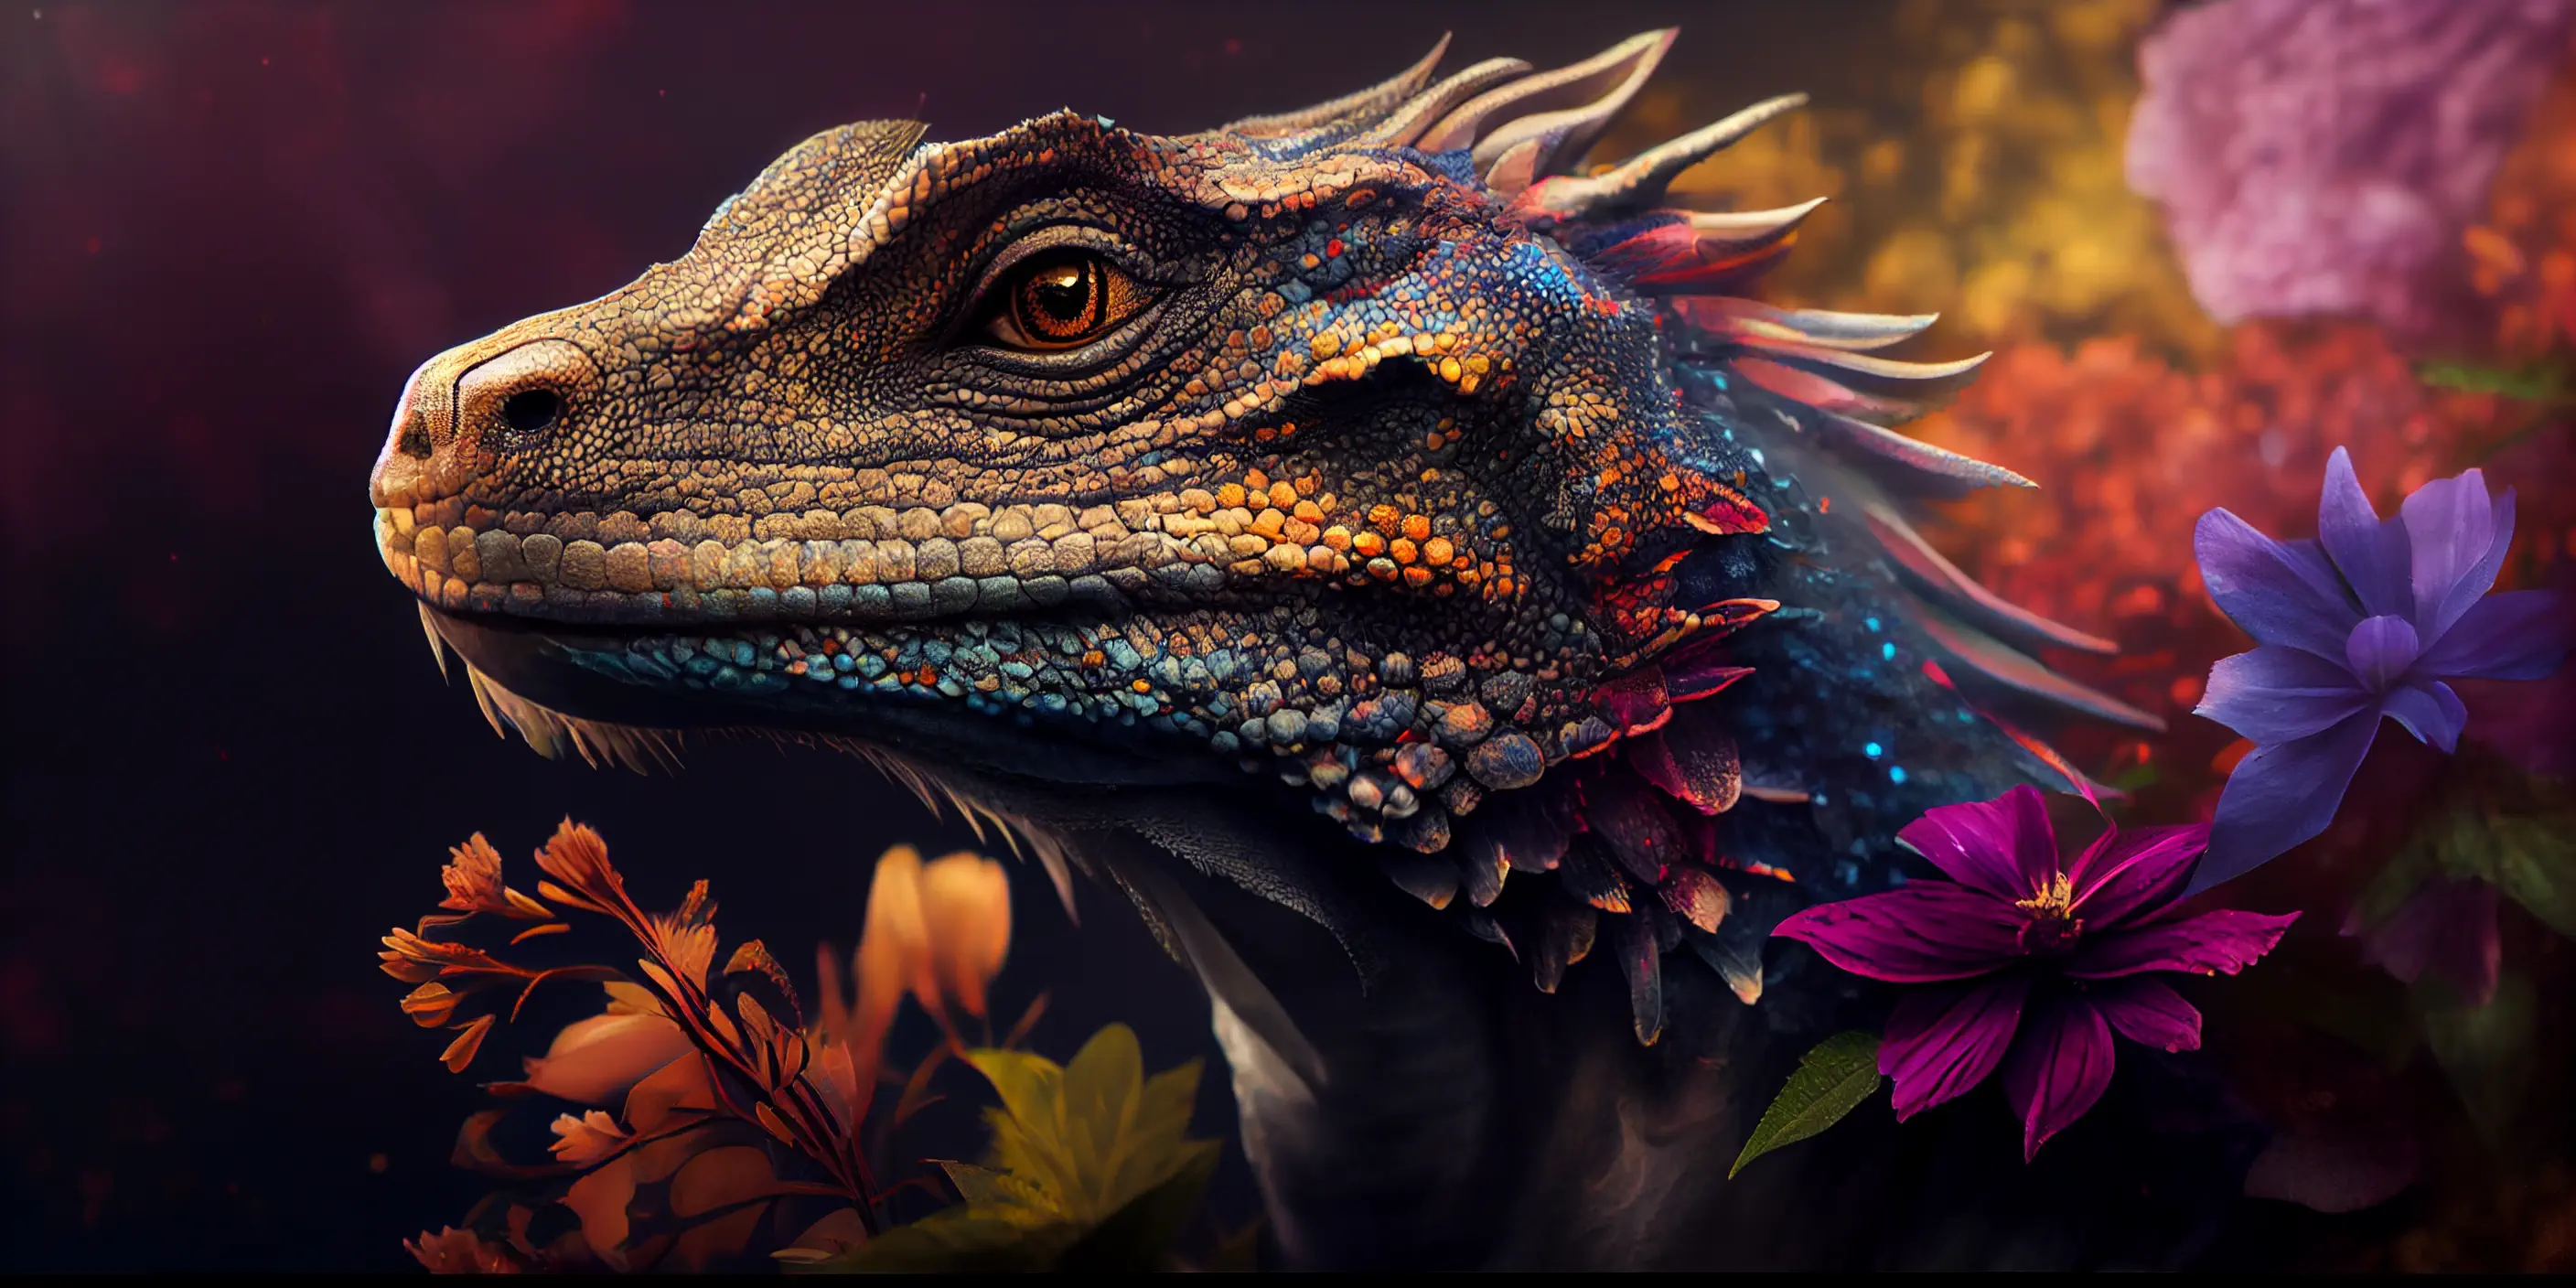 Drakonchik927_portrait_of_a_young_beautiful_dragon_with_flowers_c209ed44-6102-4031-be25-7eb1810aadd8